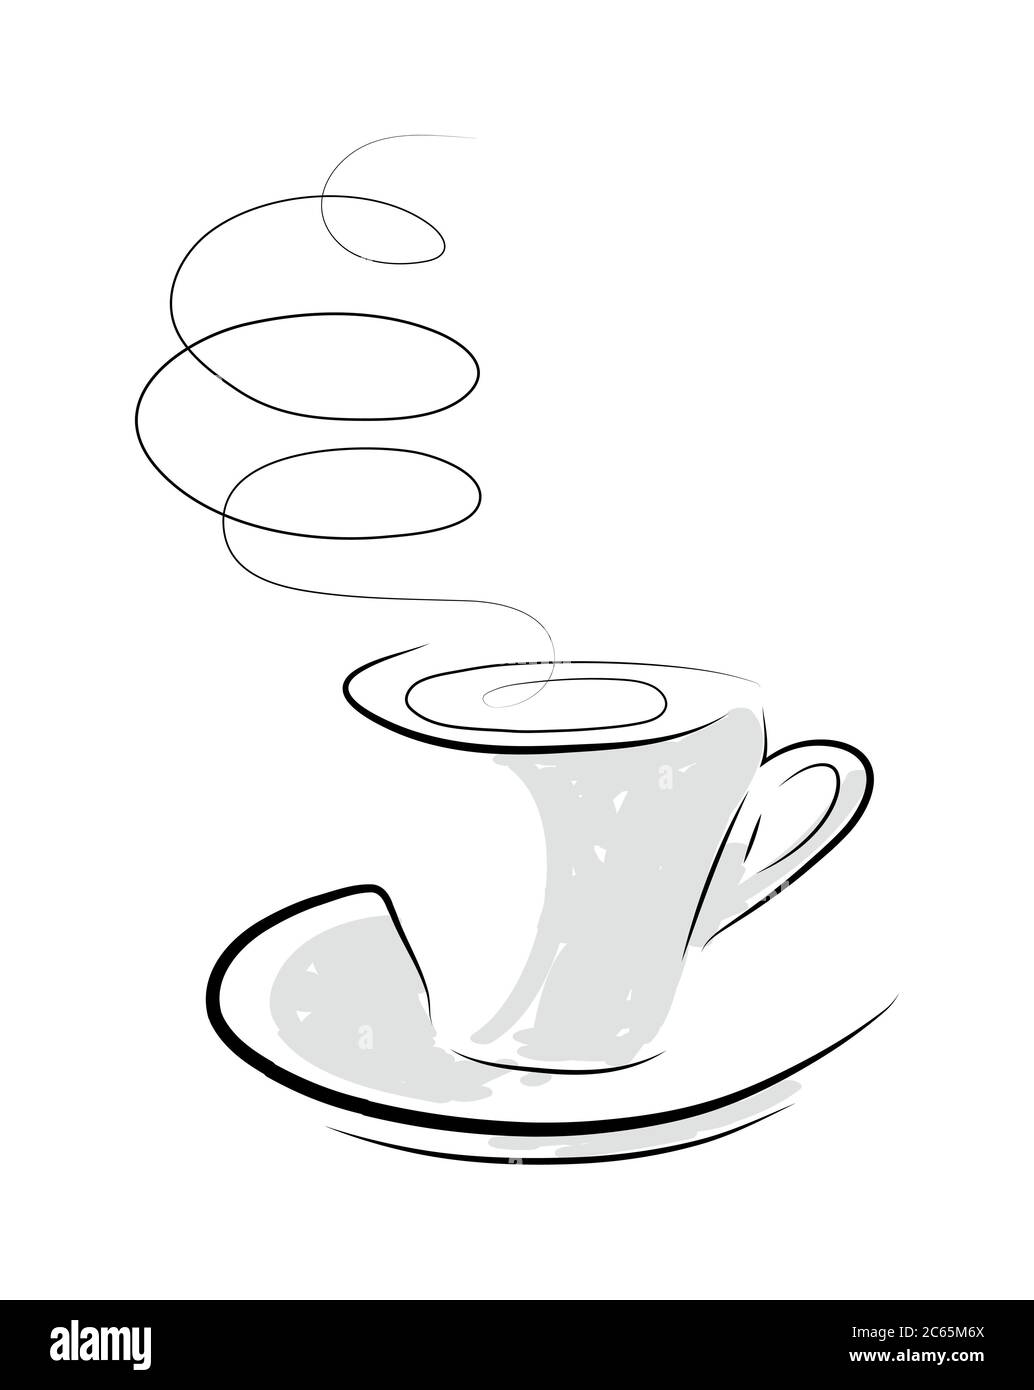 395551 Cup Drawing Images Stock Photos  Vectors  Shutterstock